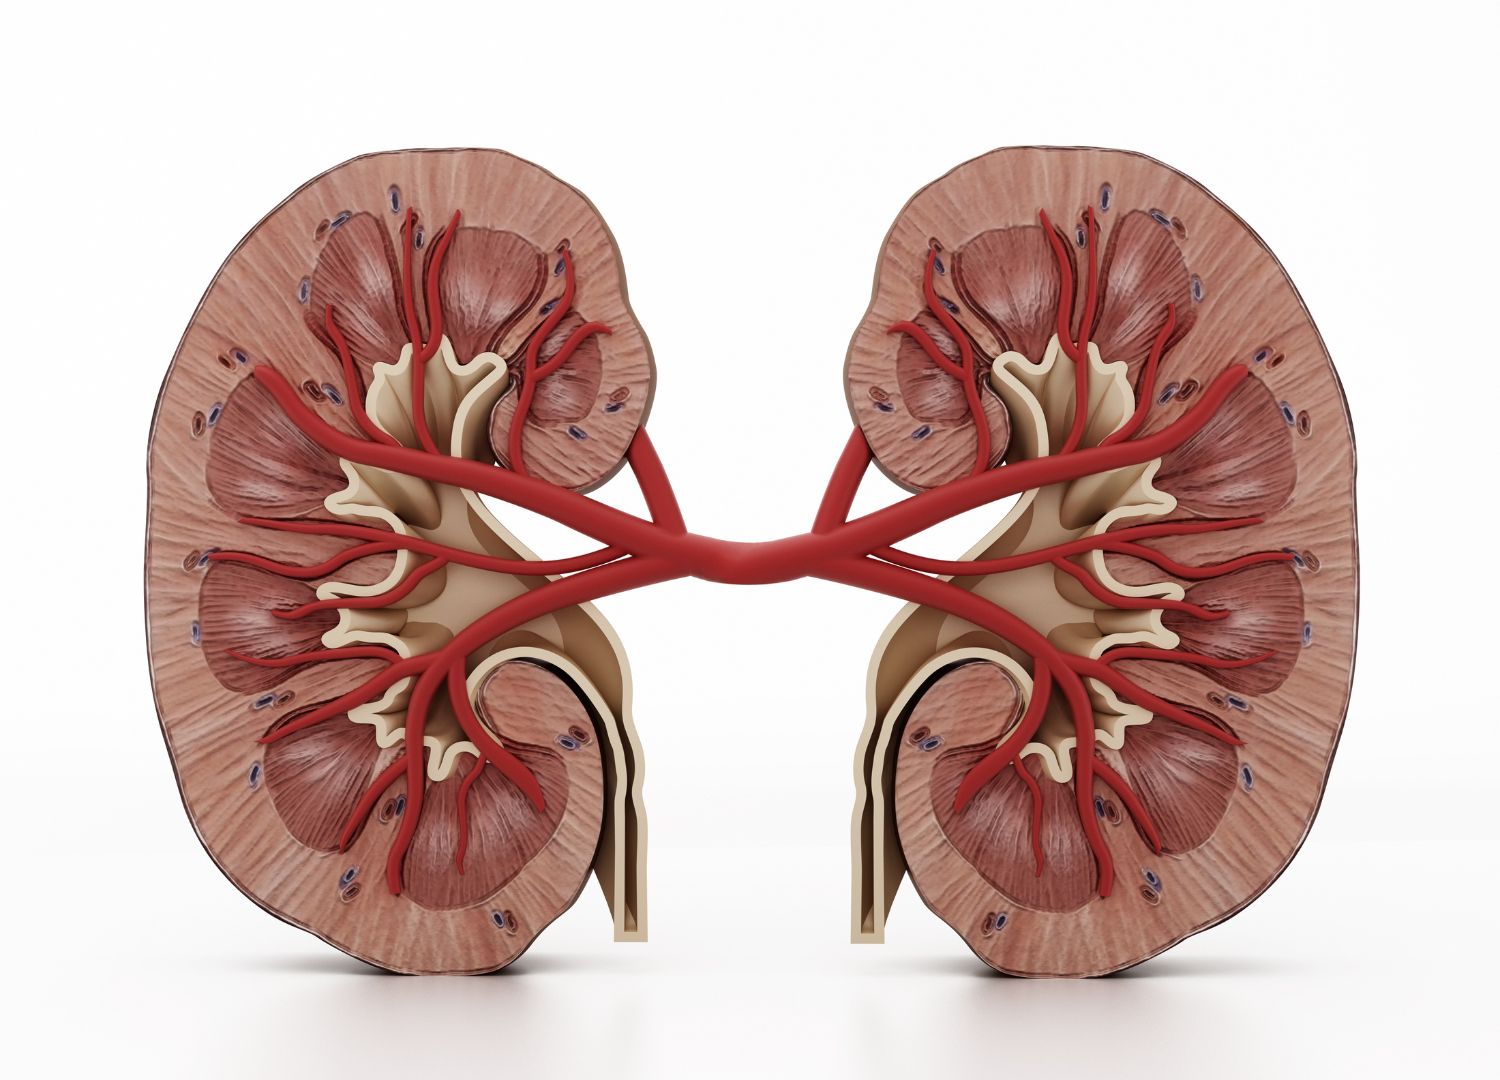 Tips to building a healthier kidney function